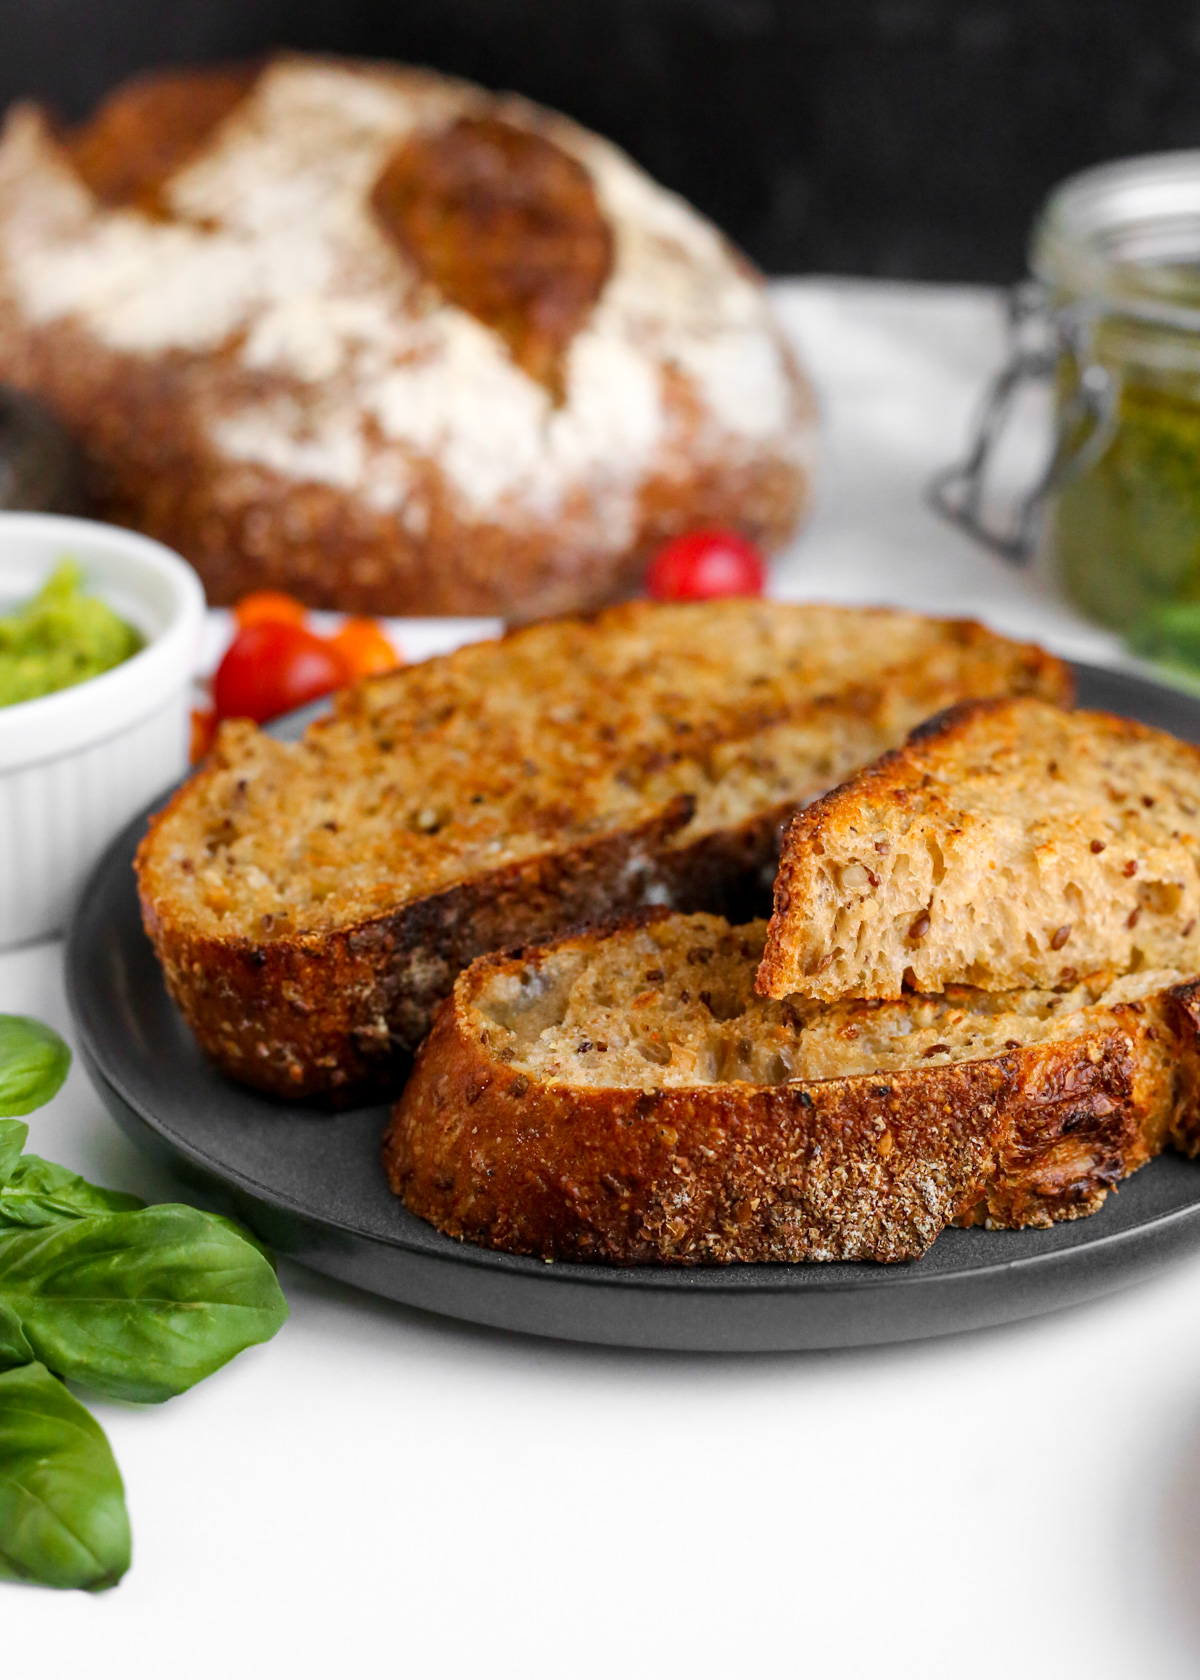 A closeup view of toasted slices of multigrain bread, appearing golden brown and crispy on the outside. Cherry tomatoes, fresh basil, mashed avocado, and a jar of pesto sauce are included in the background